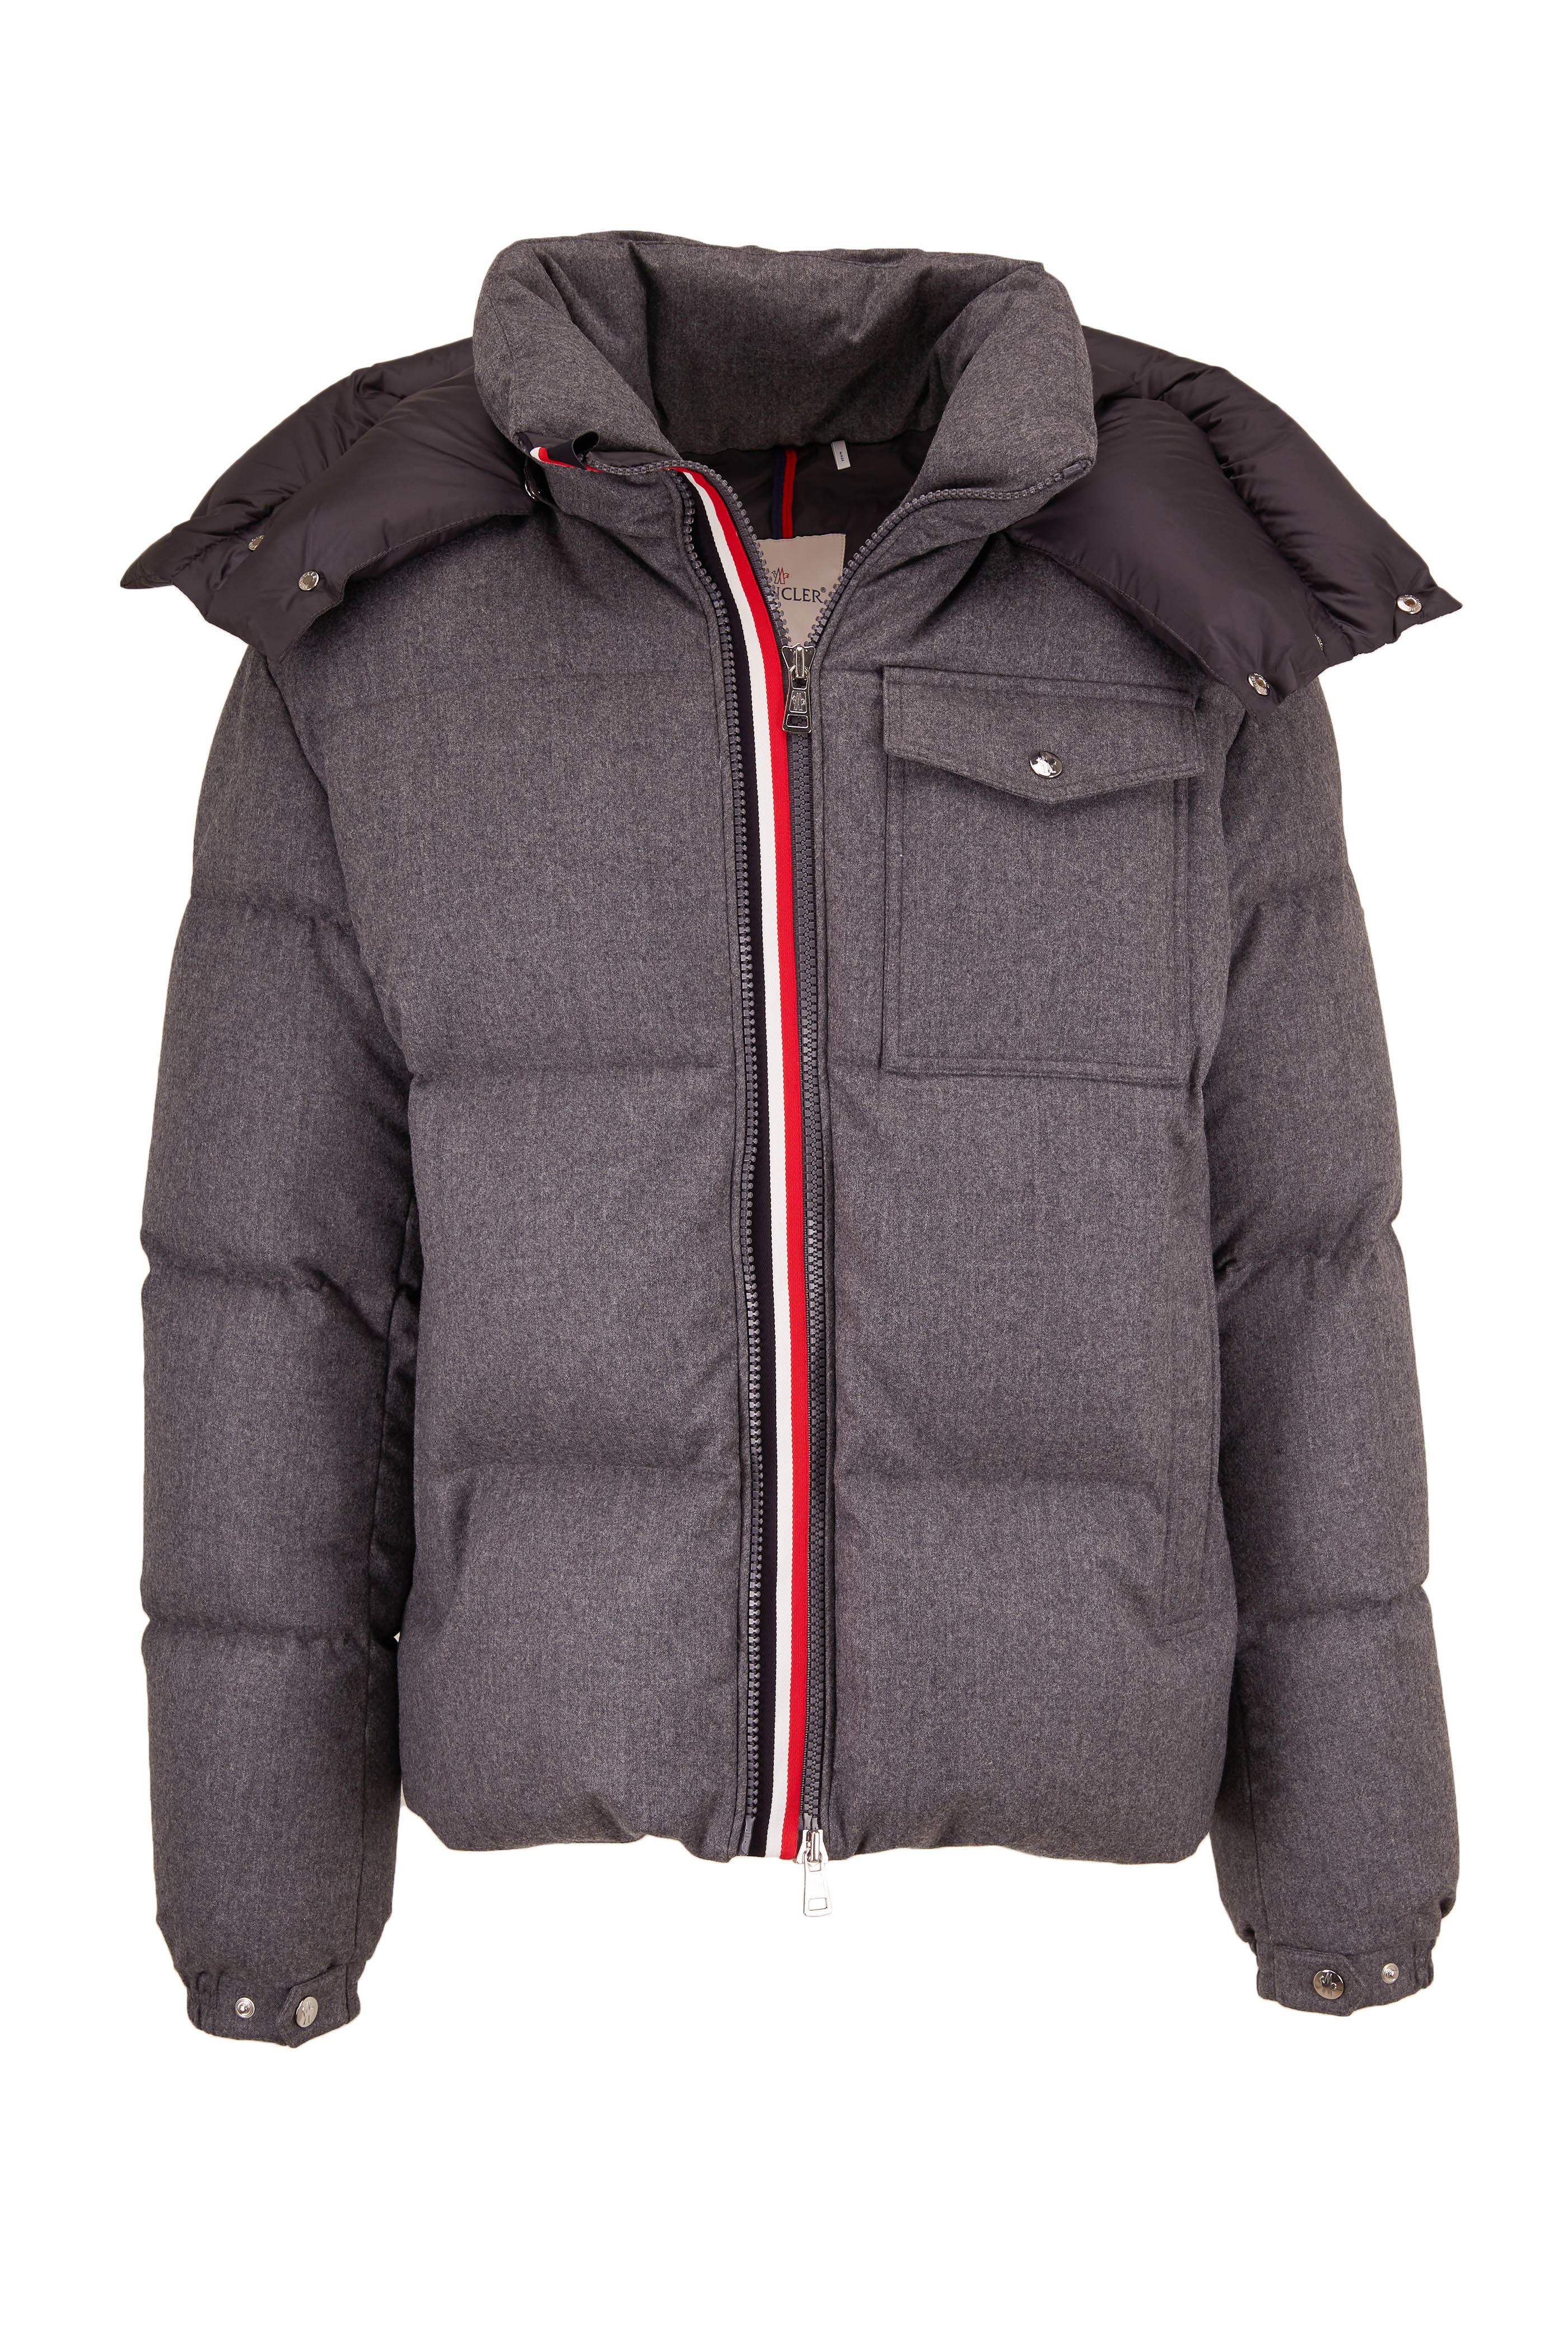 Moncler Hooded Puffer Jacket Discount, 58% OFF | www 